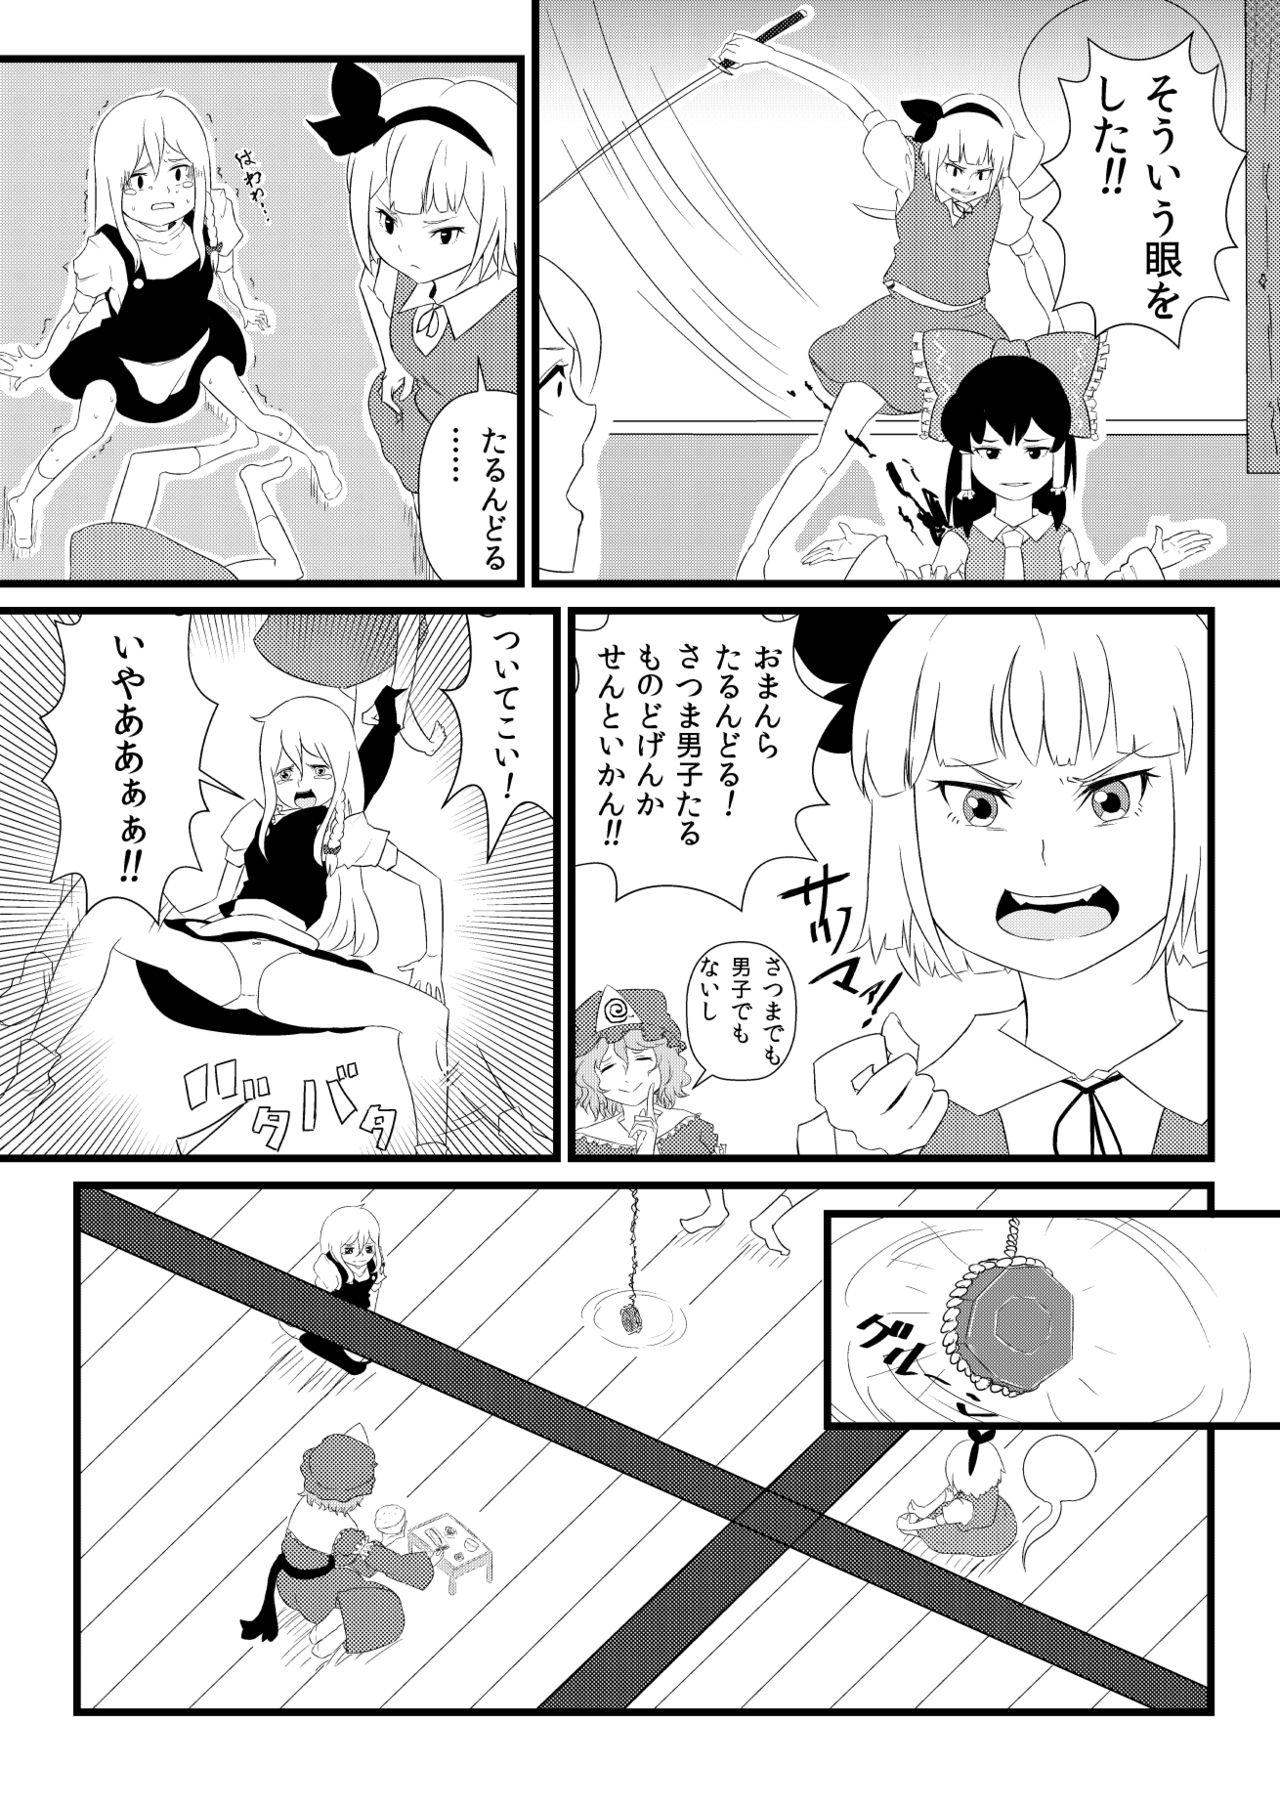 Women Sucking 東方板としあき合同誌5 - Touhou project Casada - Page 3